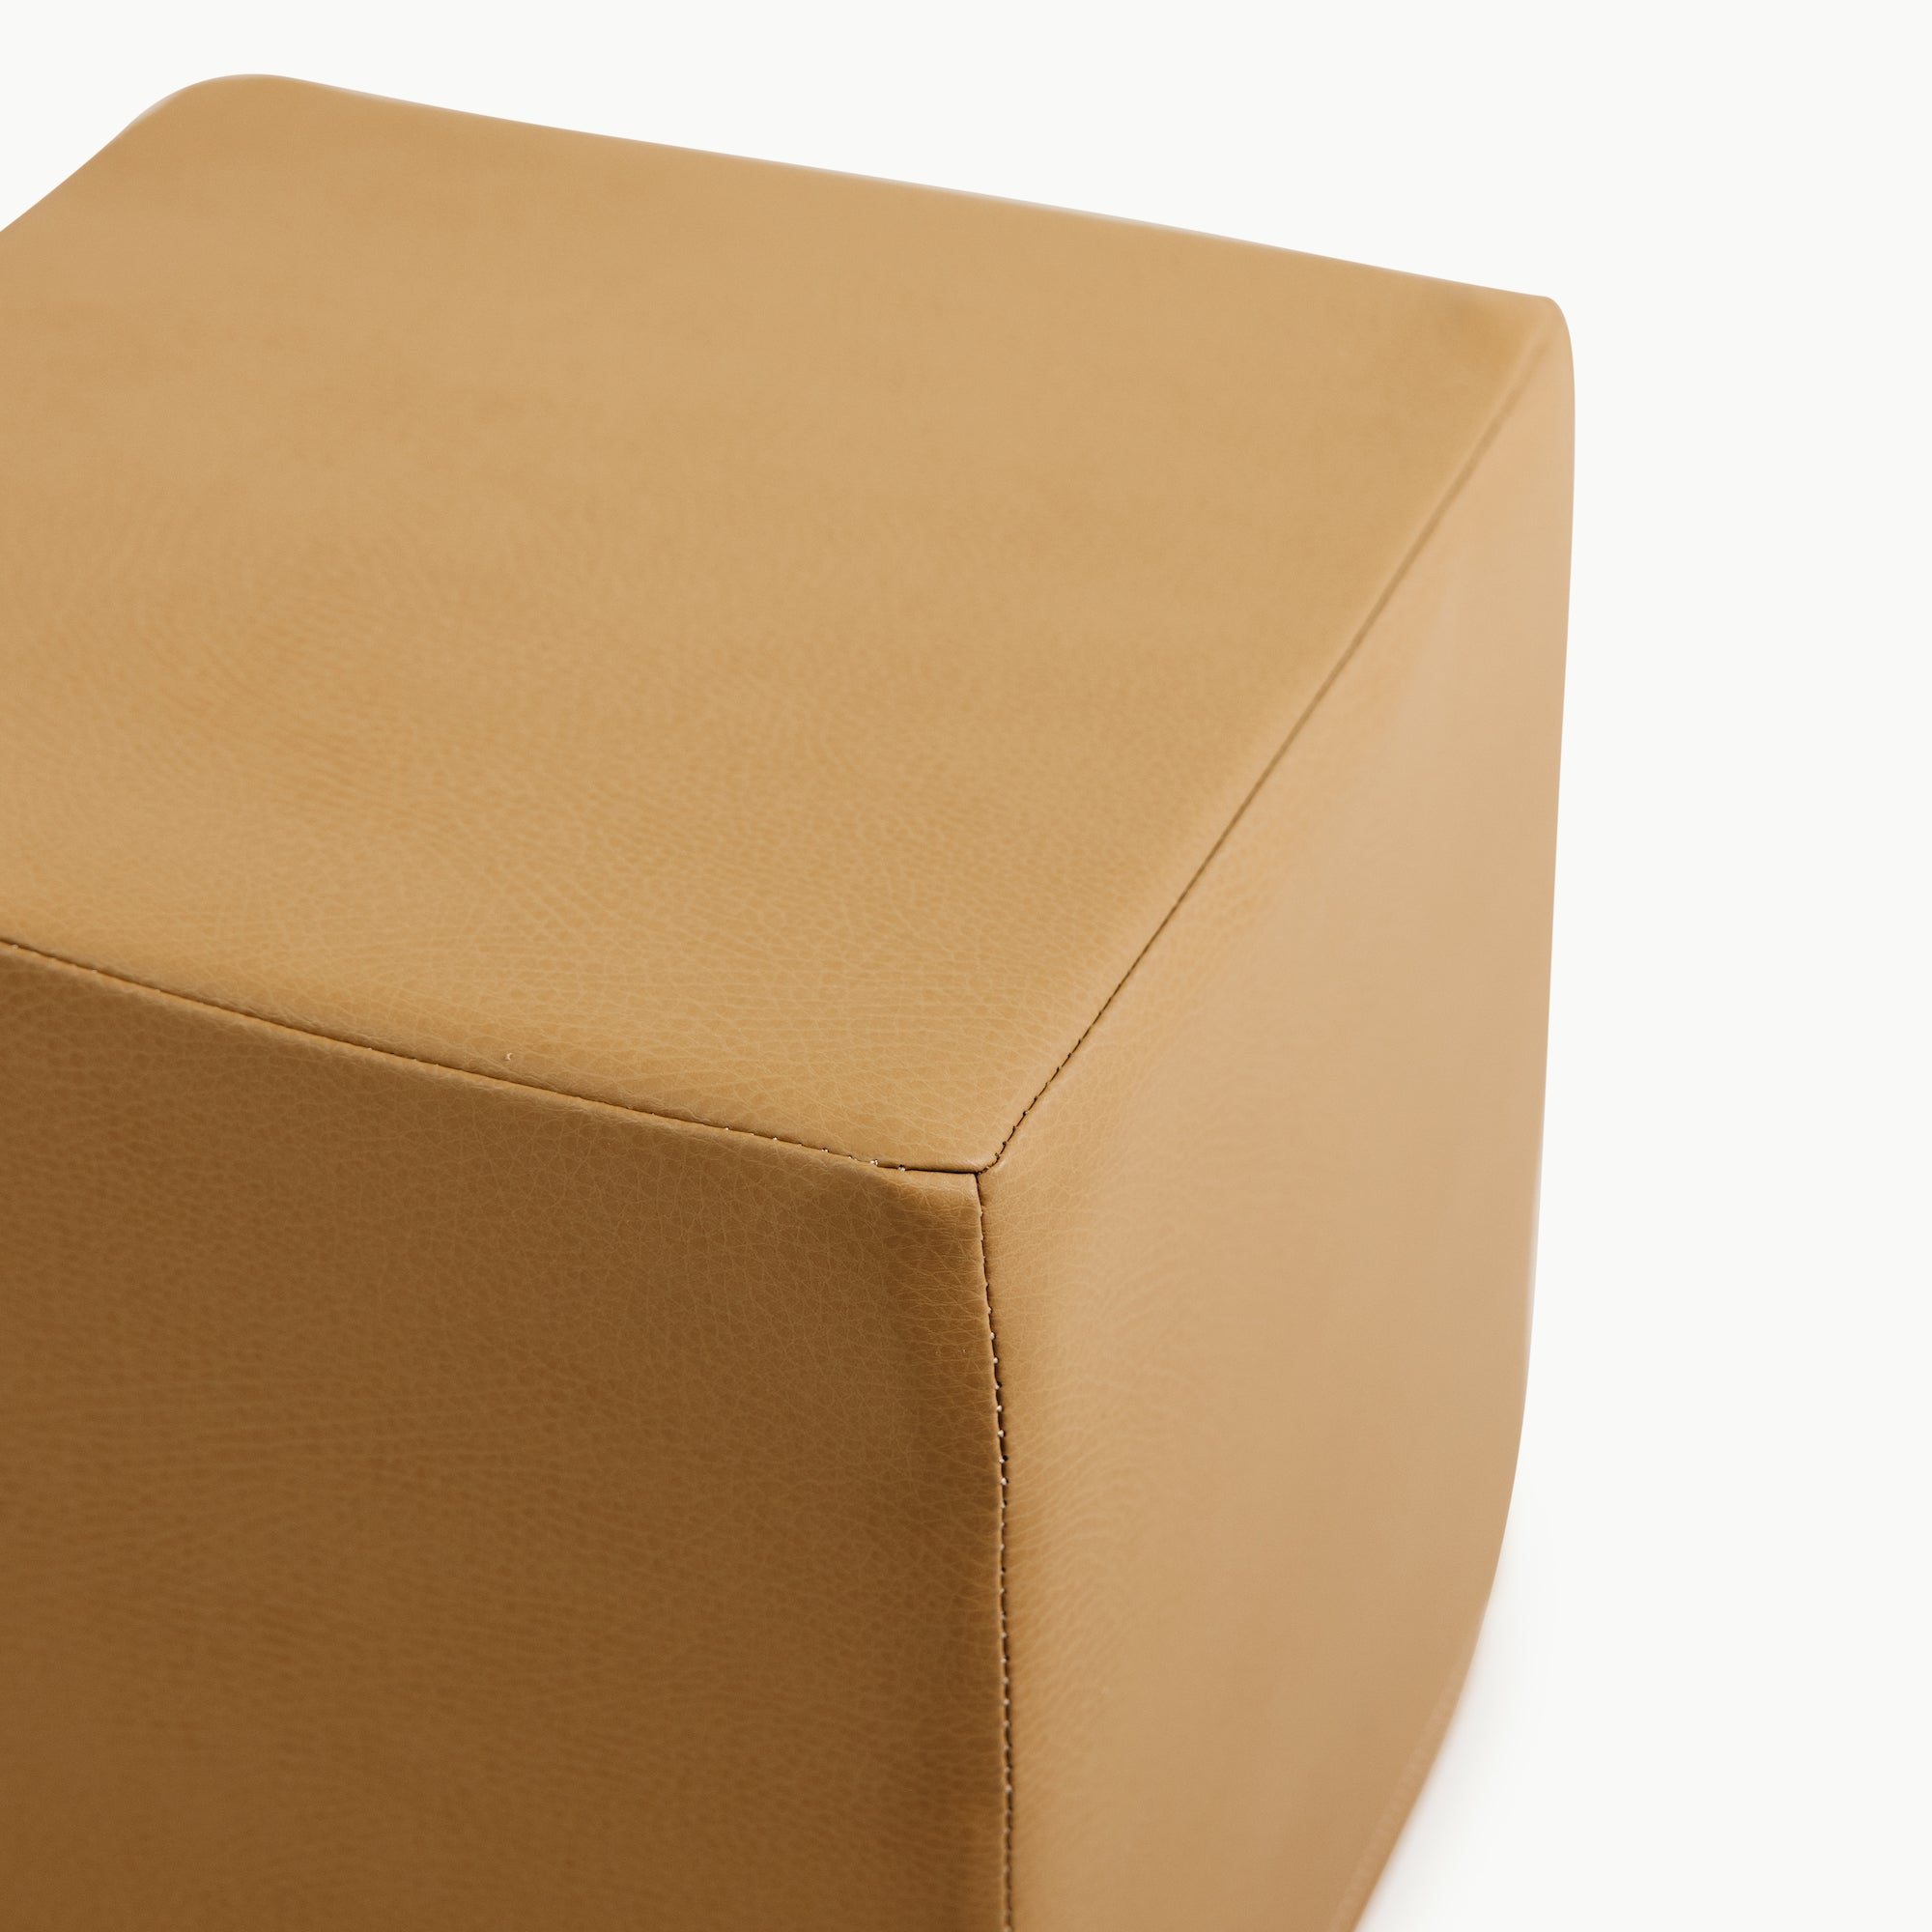 Terra • Ochre (on sale)@kids playing with the ochre cube